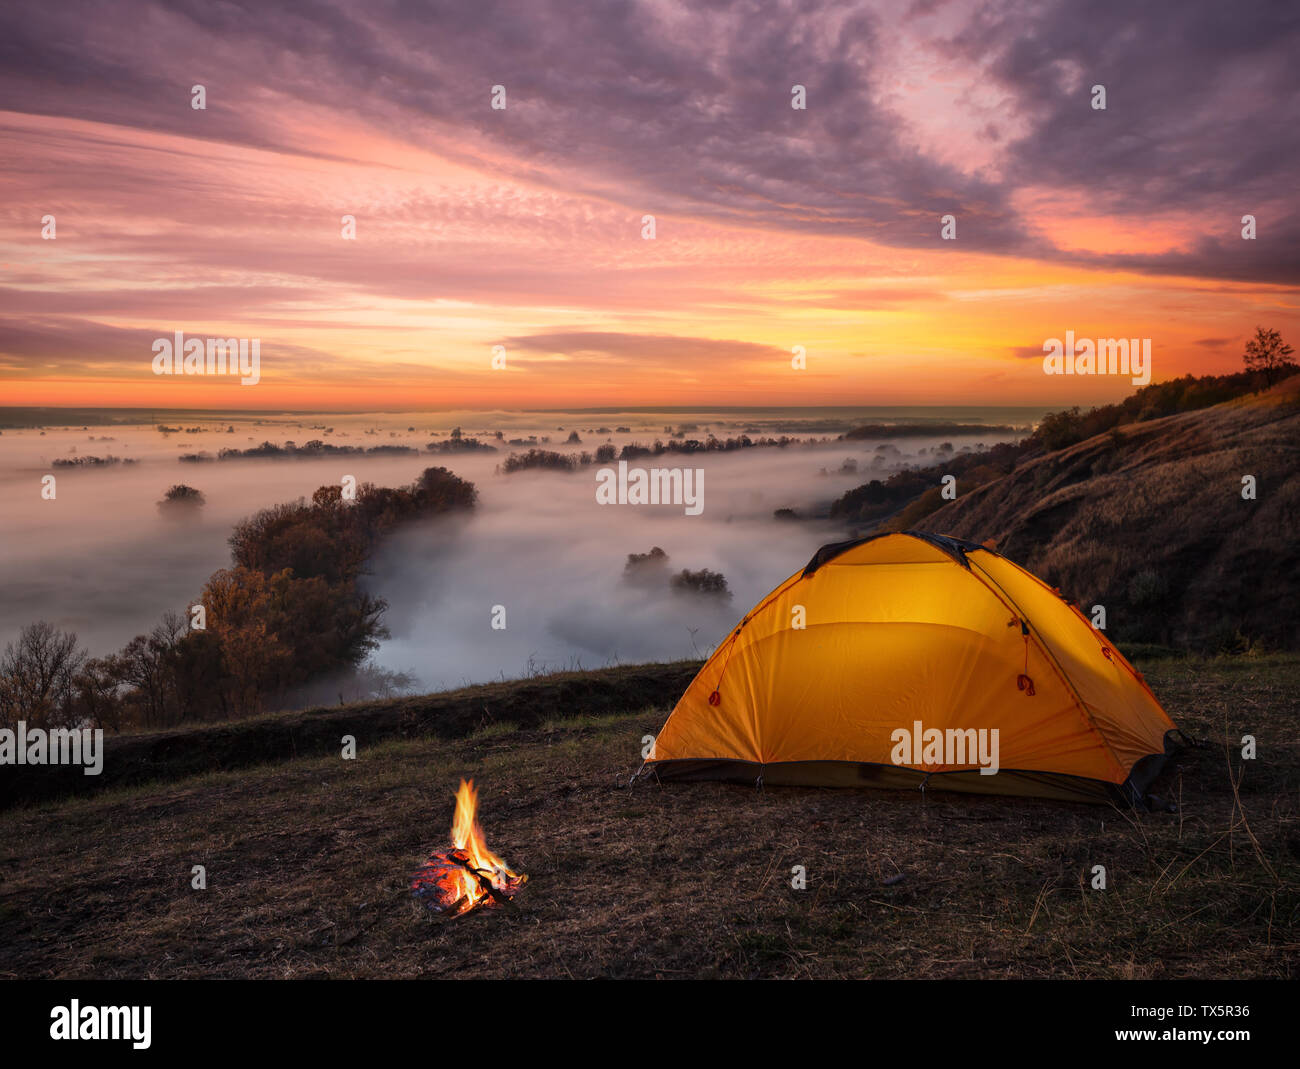 Orange lit inside tent and fire over misty river at sunset Stock Photo